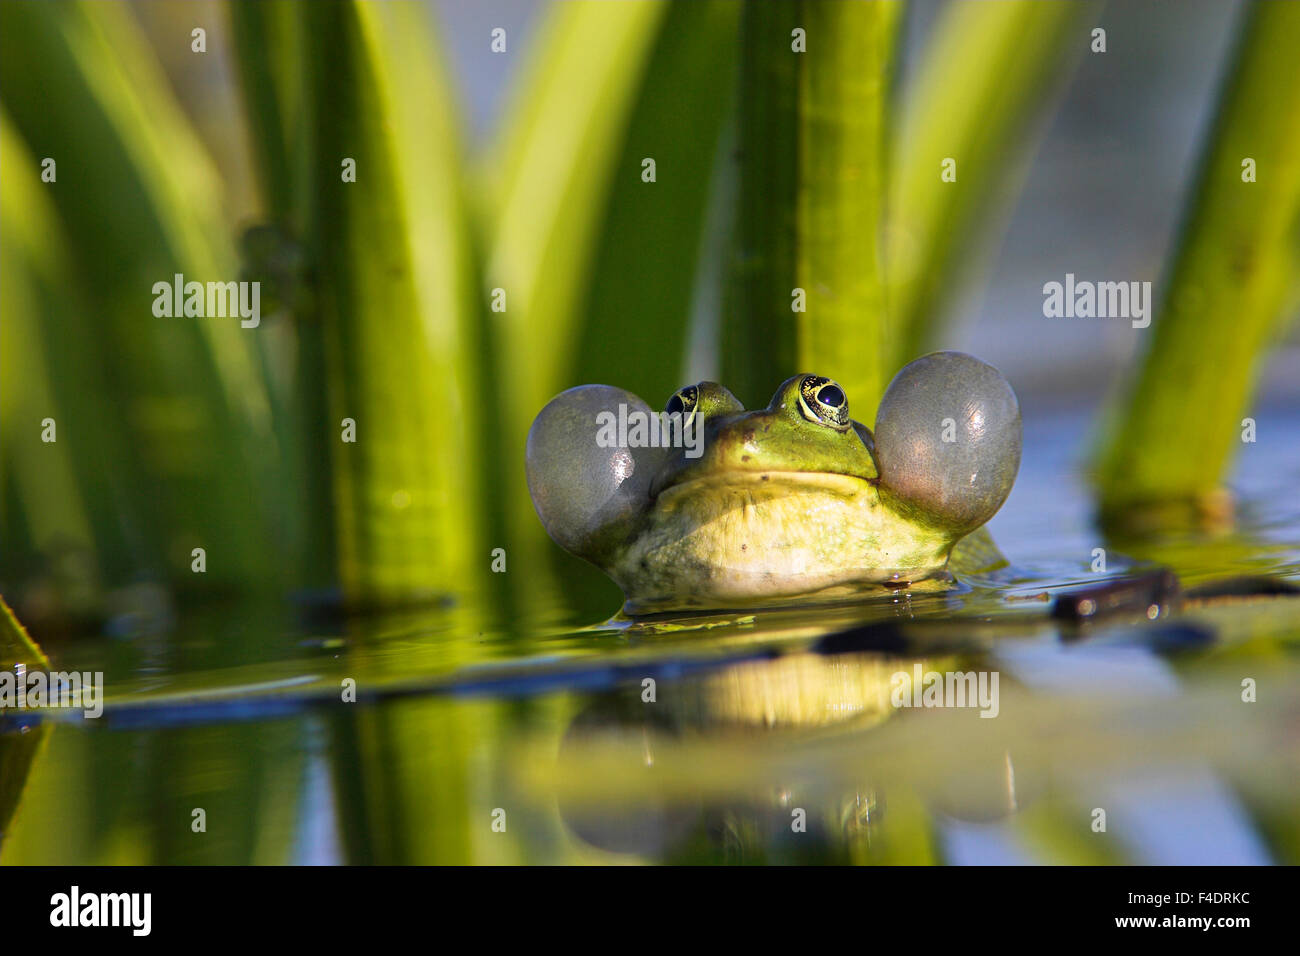 Edible Frog croaking, quacking (Rana esculenta or Pelophylax kl. esculentus) with inflated vocal sac visible in the Danube Delta between dense stands of Water Soldier (Stratiotes aloides) Europe, Eastern Europe, Romania, Danube Delta. Stock Photo